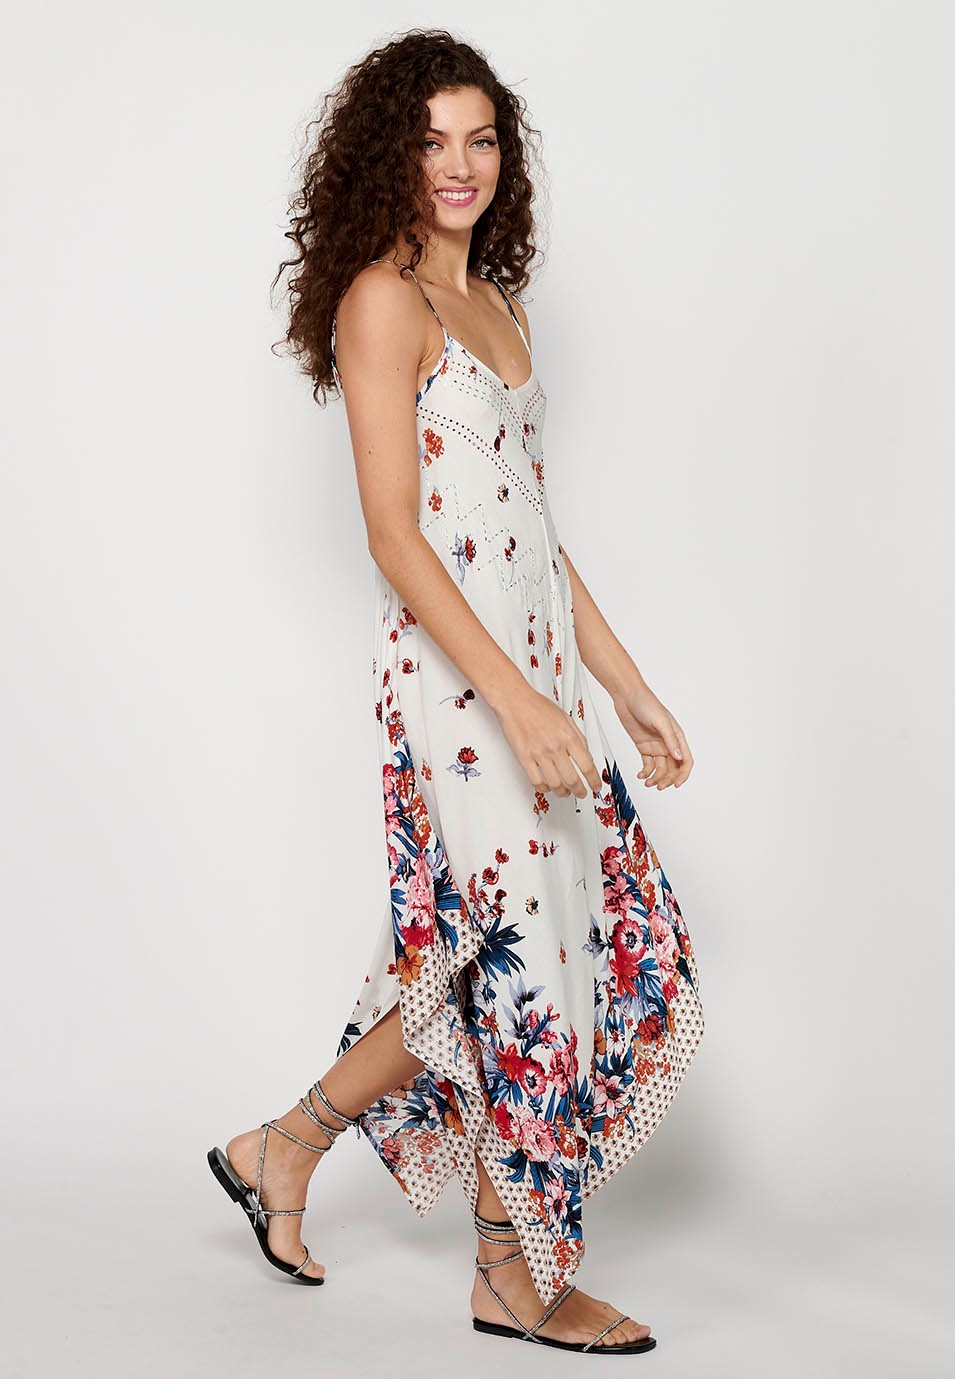 Strap Dress with V-neckline and White Floral Print for Women 3